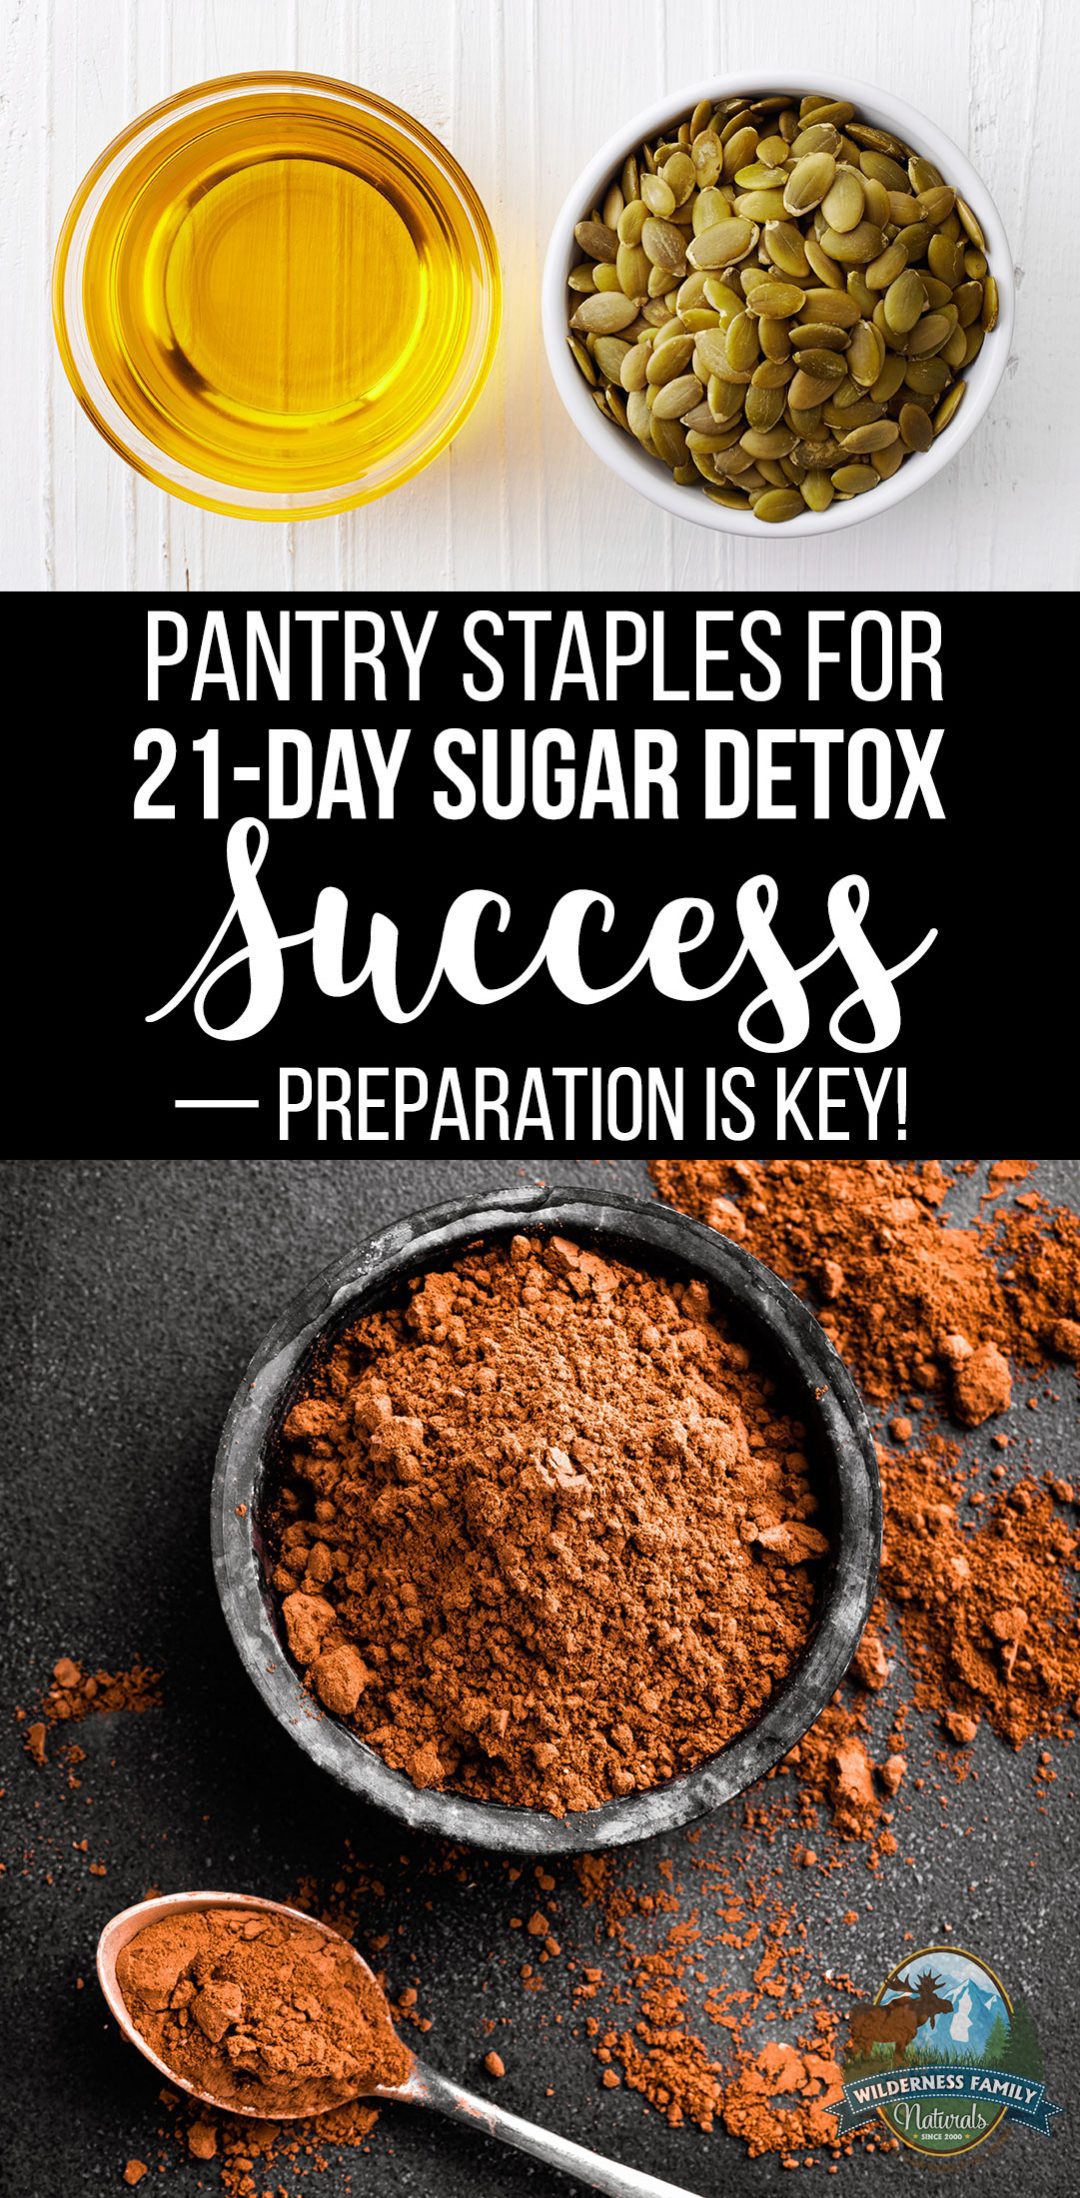 36 Pantry Staples For 21-Day Sugar Detox Success